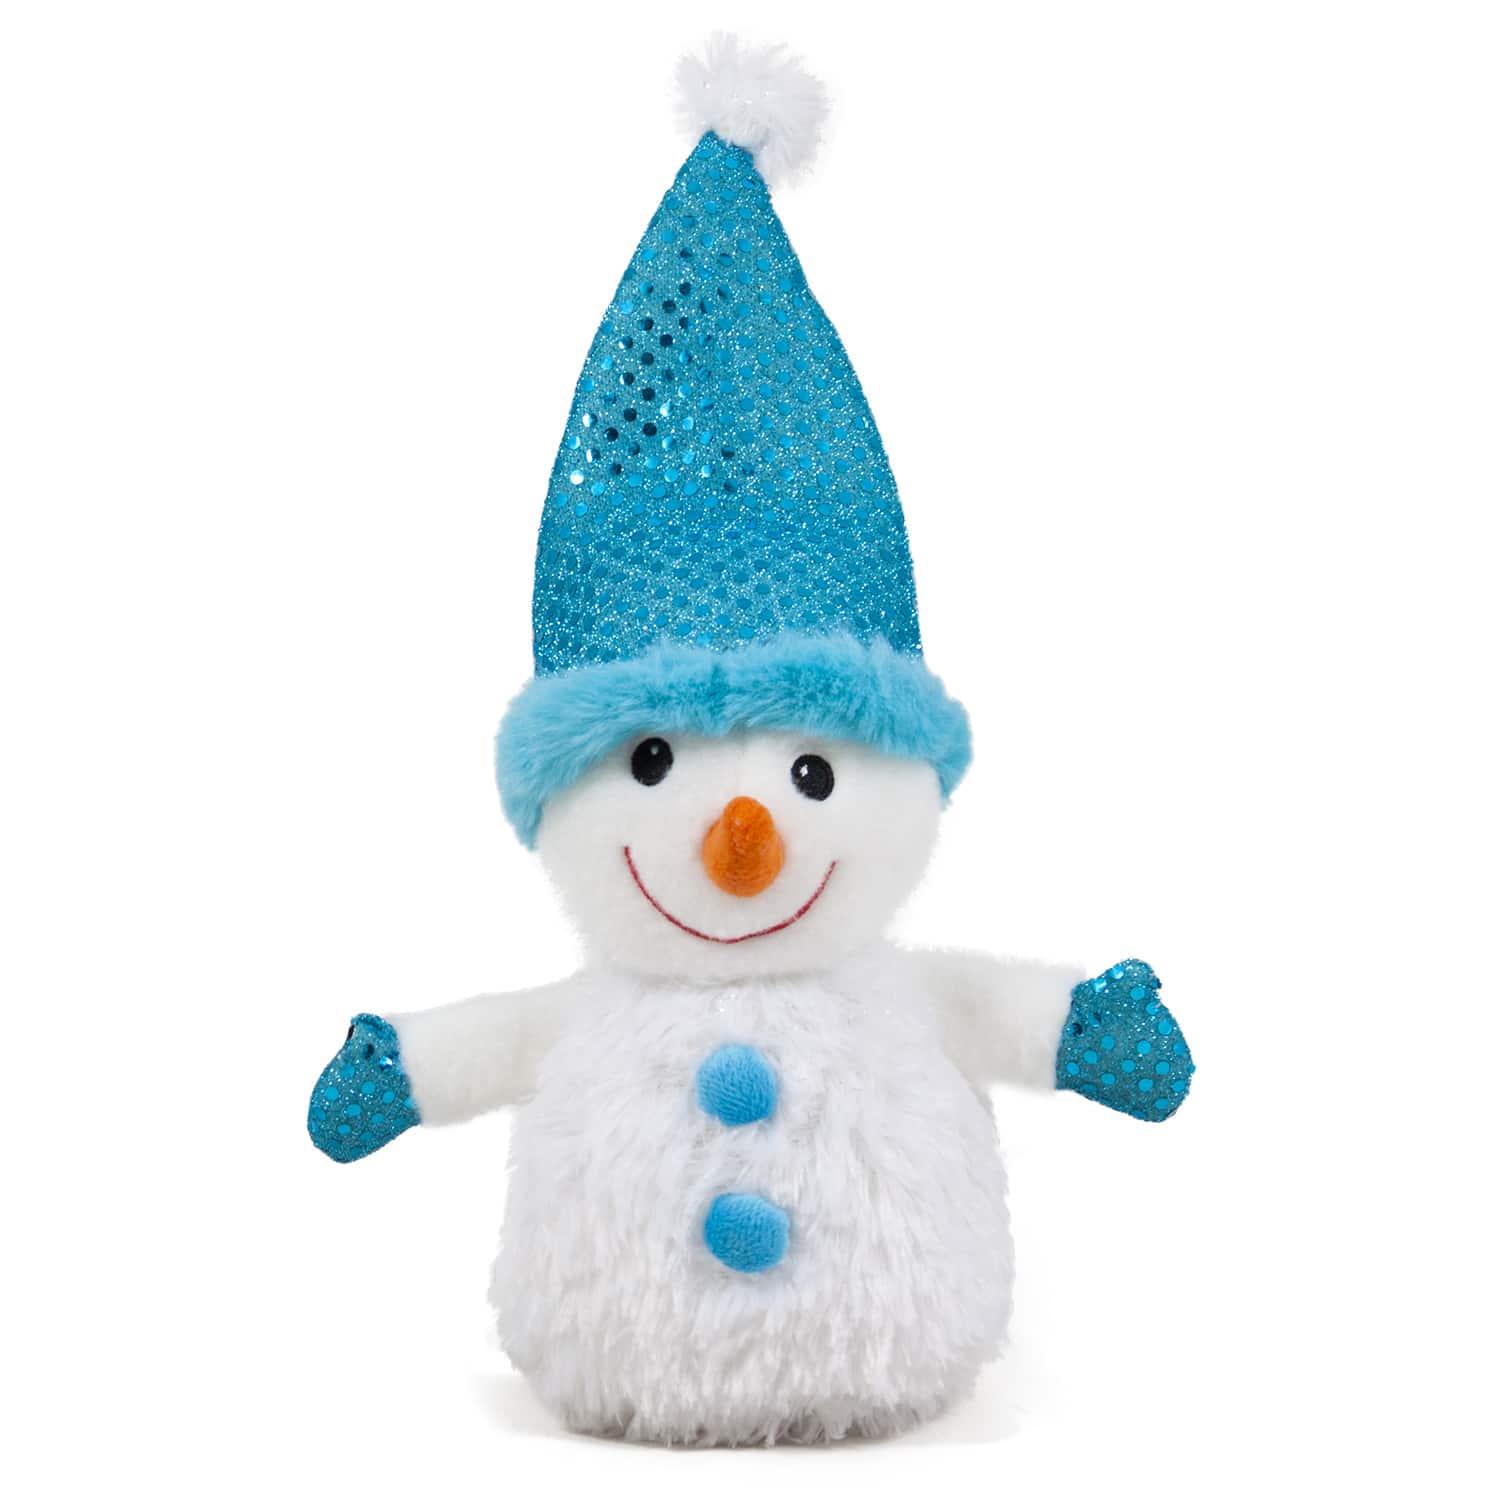 Snowman with hat - Blue